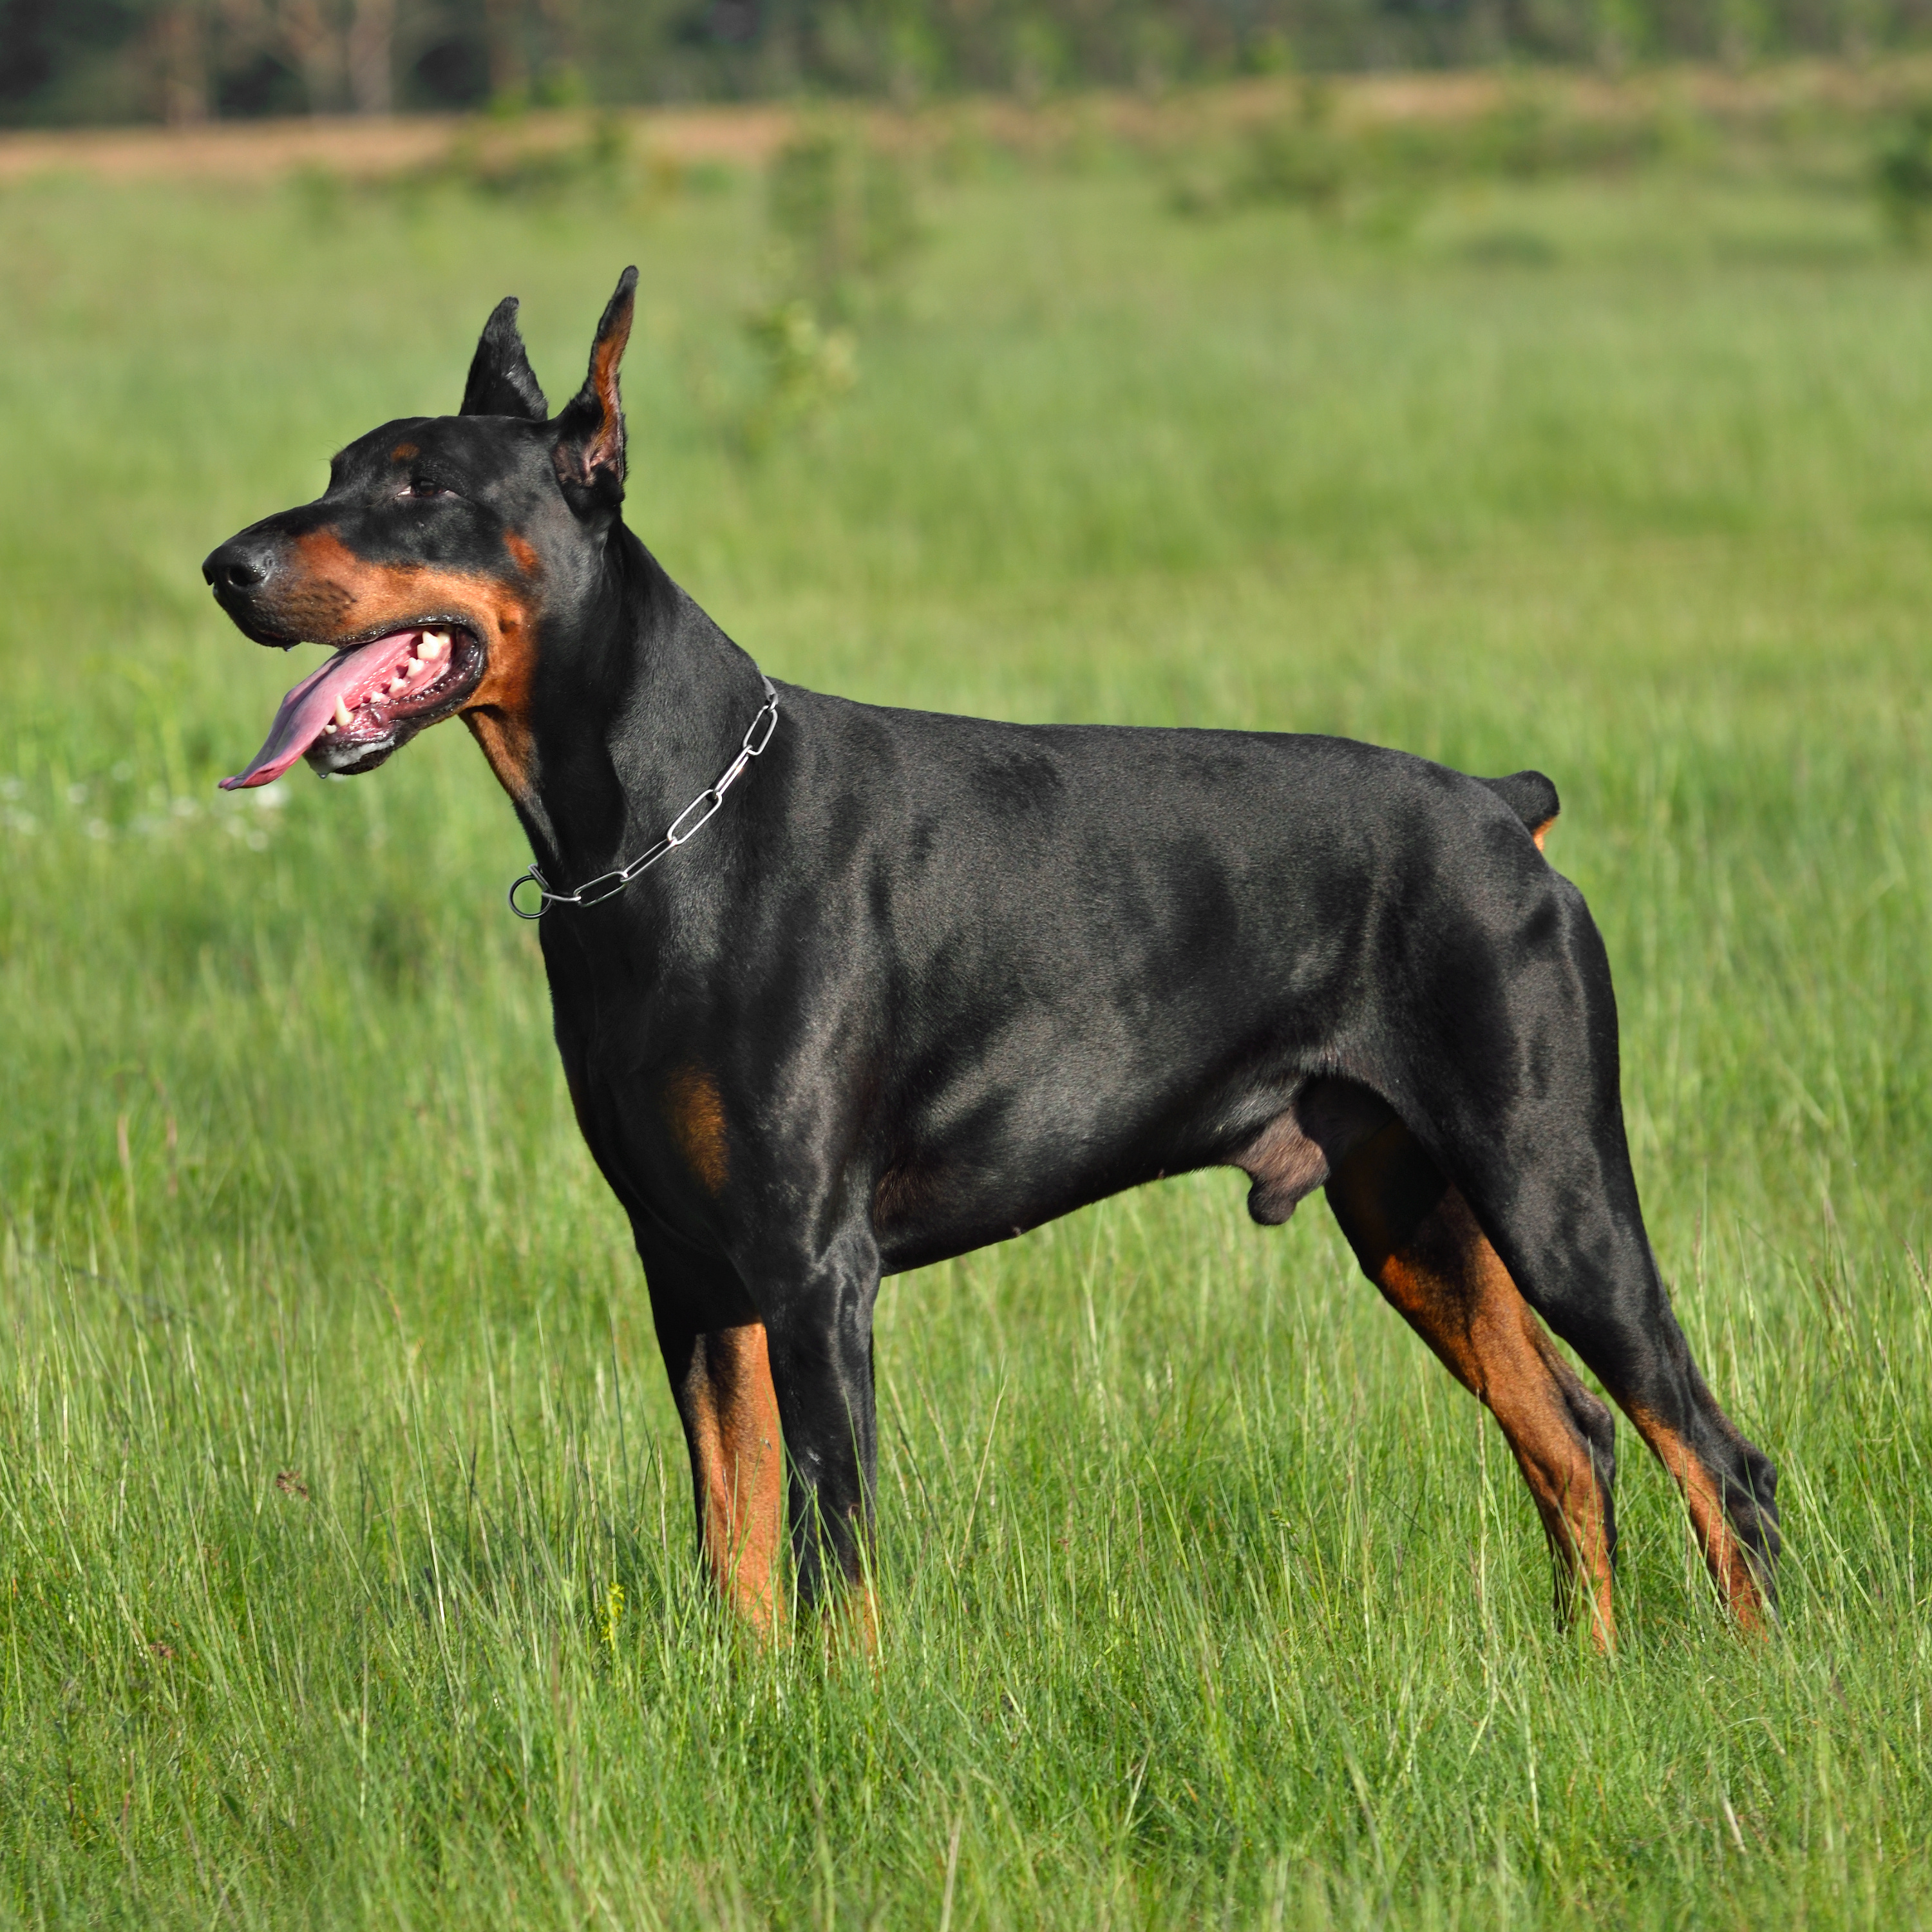 Dog Training Elite has expert Doberman training in Des Moines, IA
																															 that are experienced in a variety of positive training methods for Dobermans.